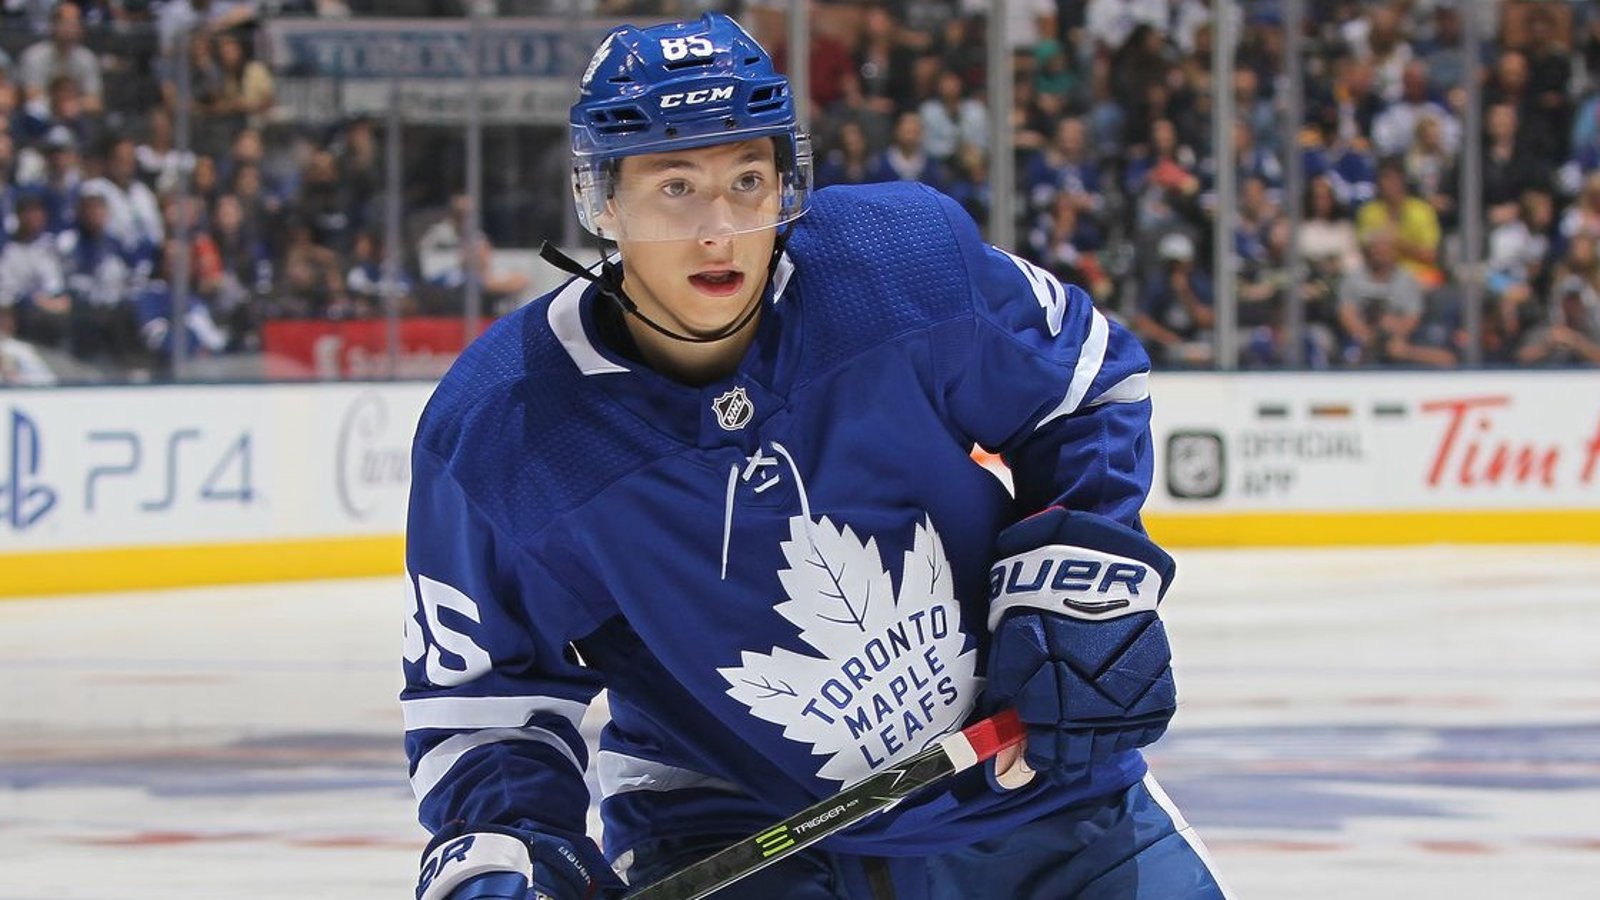 Maple Leafs promote young forward to main roster.